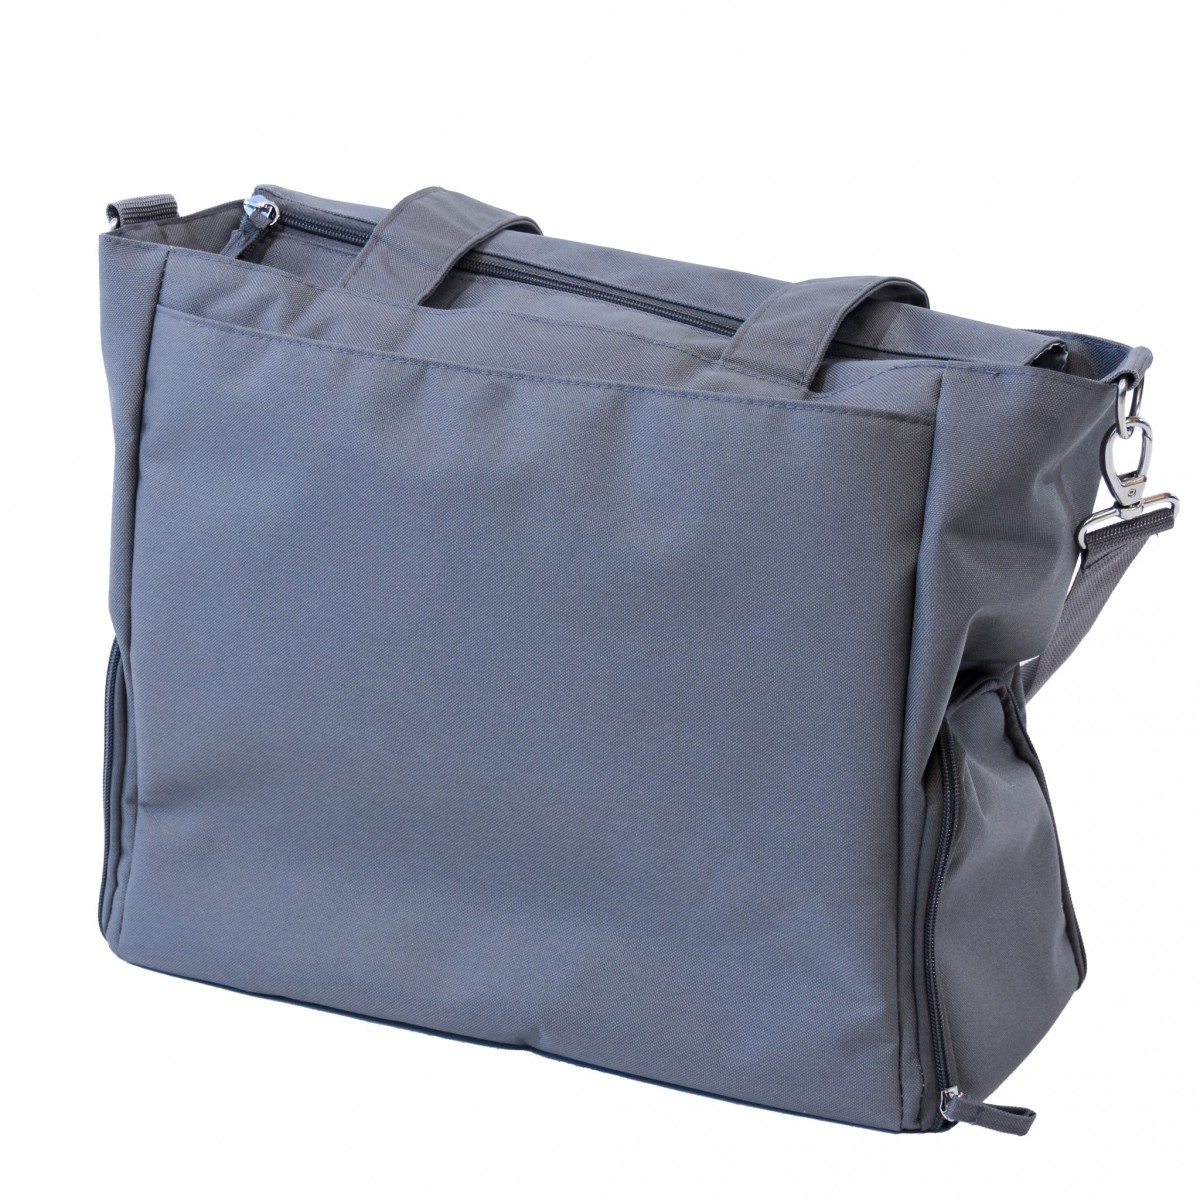 Dr. Brown's Carryall Review